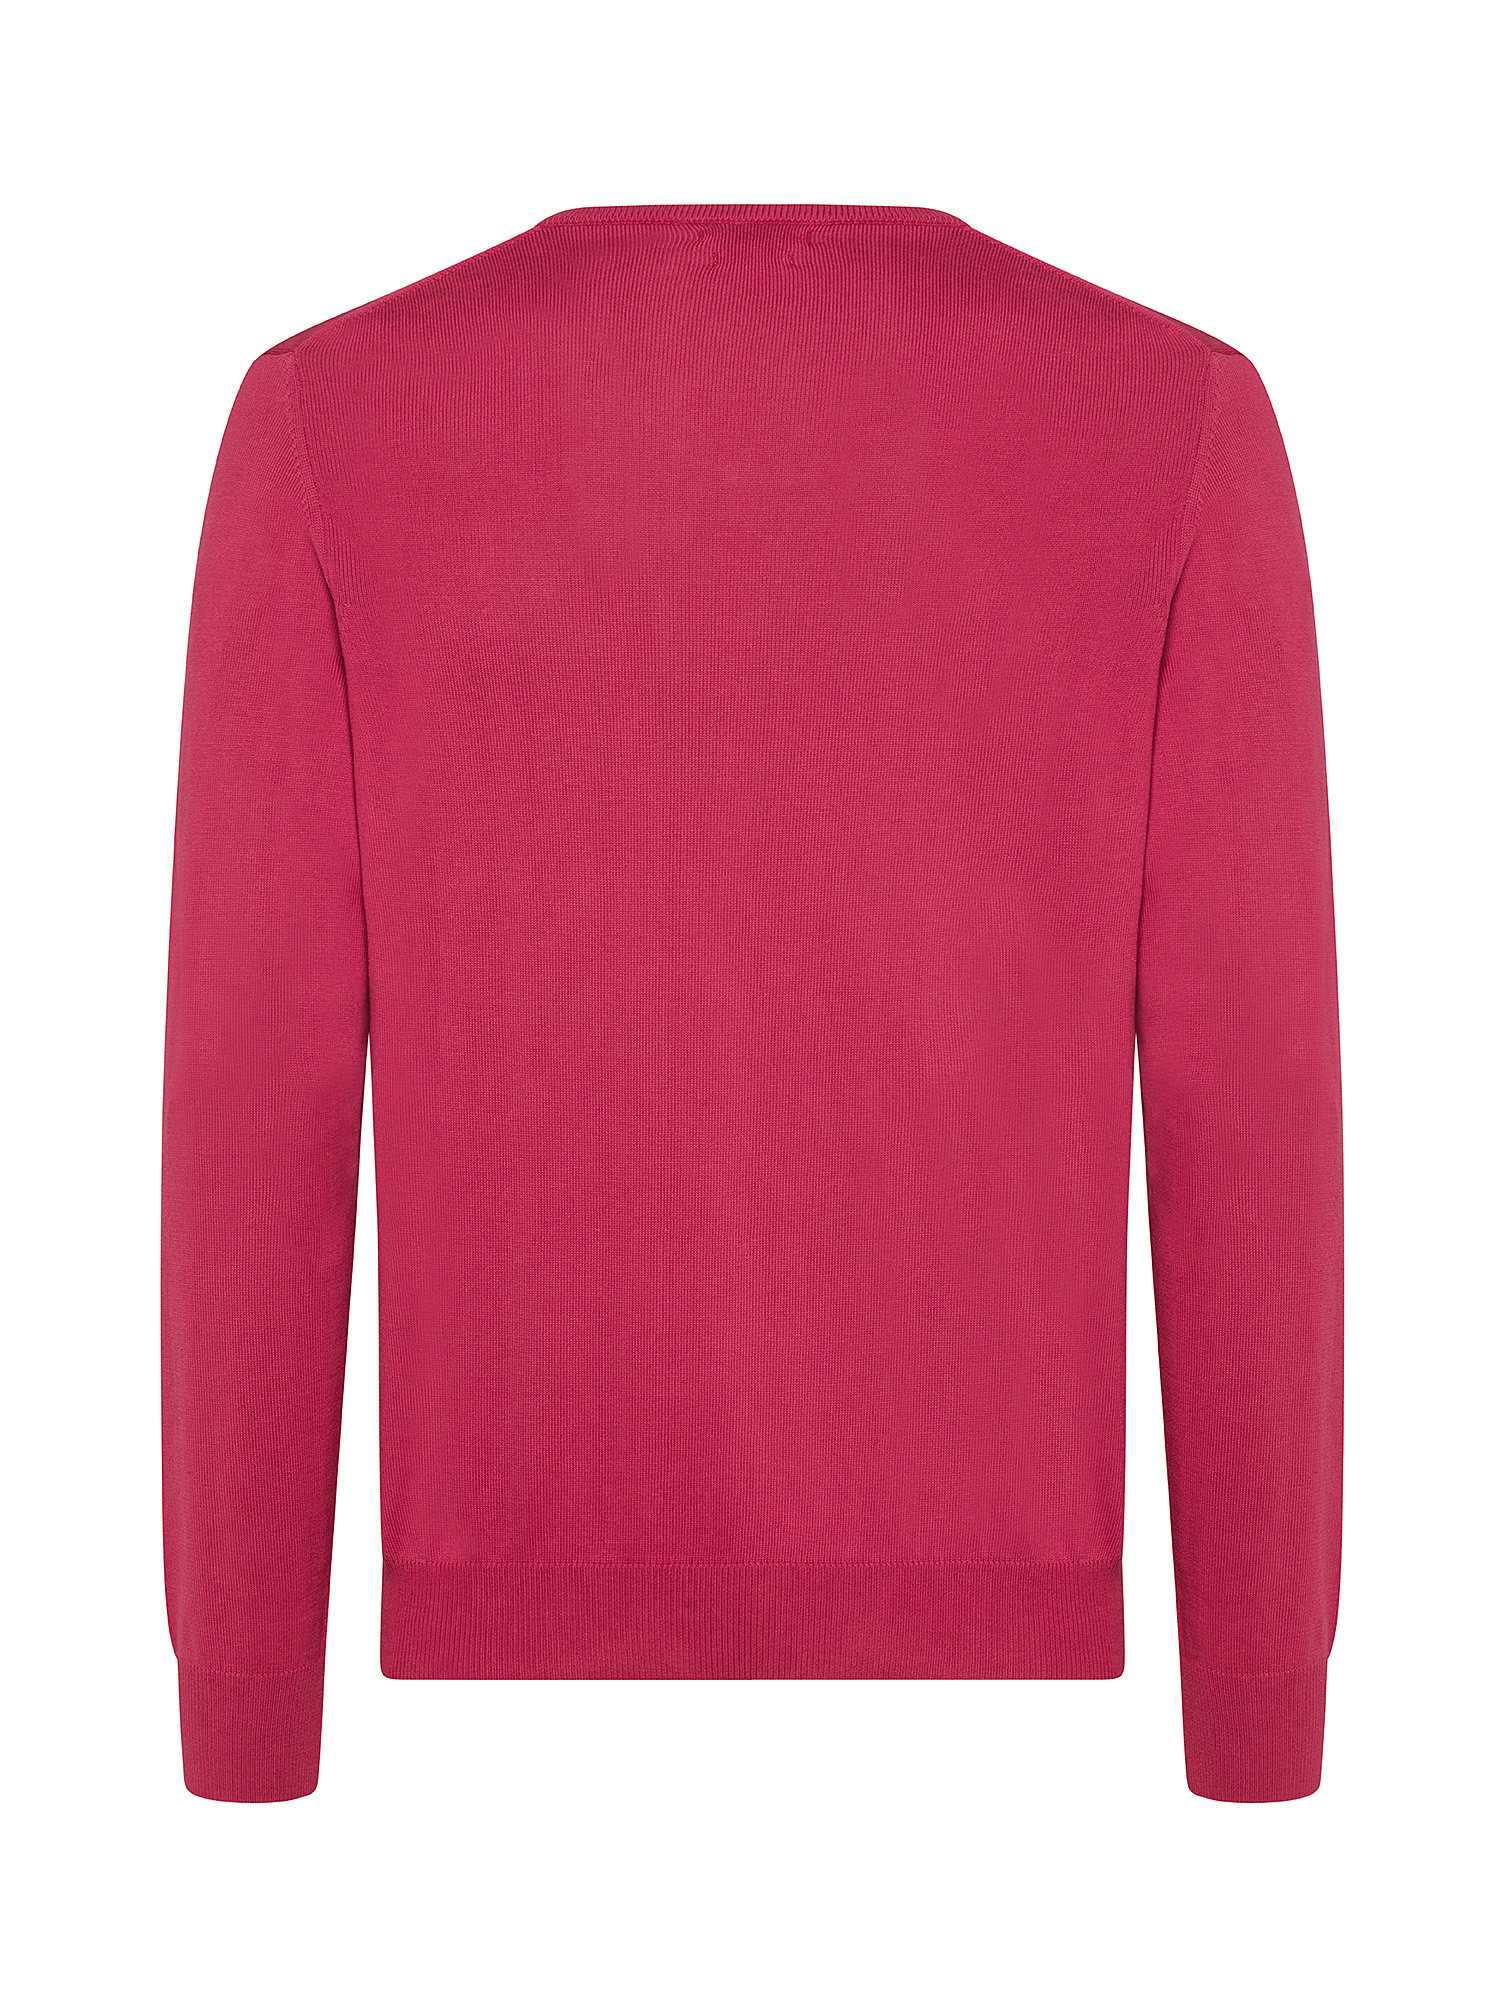 Luca D'Altieri - V-neck pullover in extrafine pure cotton, Pink Fuchsia, large image number 1